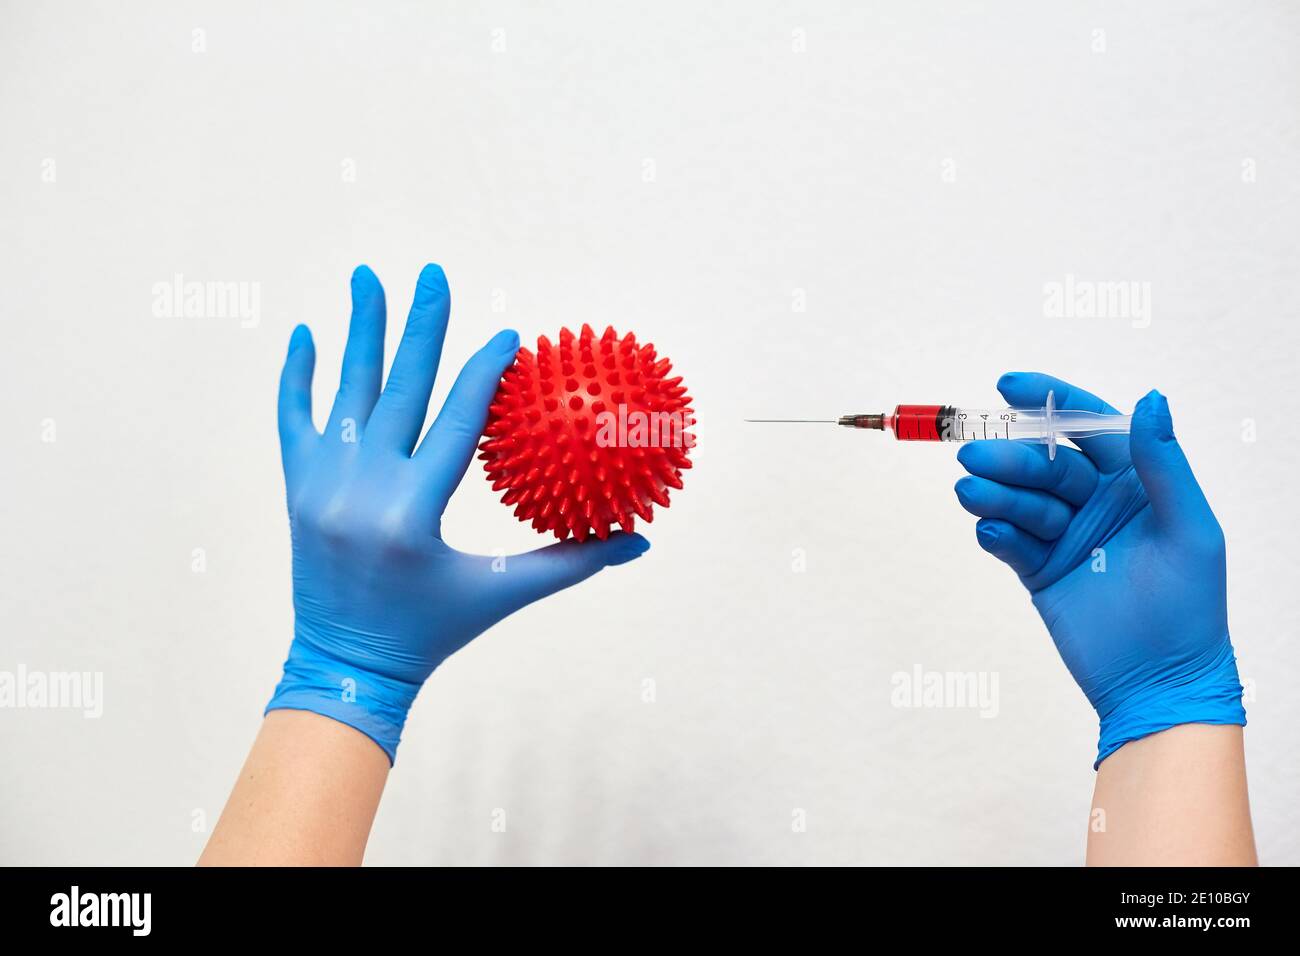 coronavirus vaccine, vaccination of the population against the disease, fighting the epidemic, hands in medical gloves holding a syringe with medicine Stock Photo